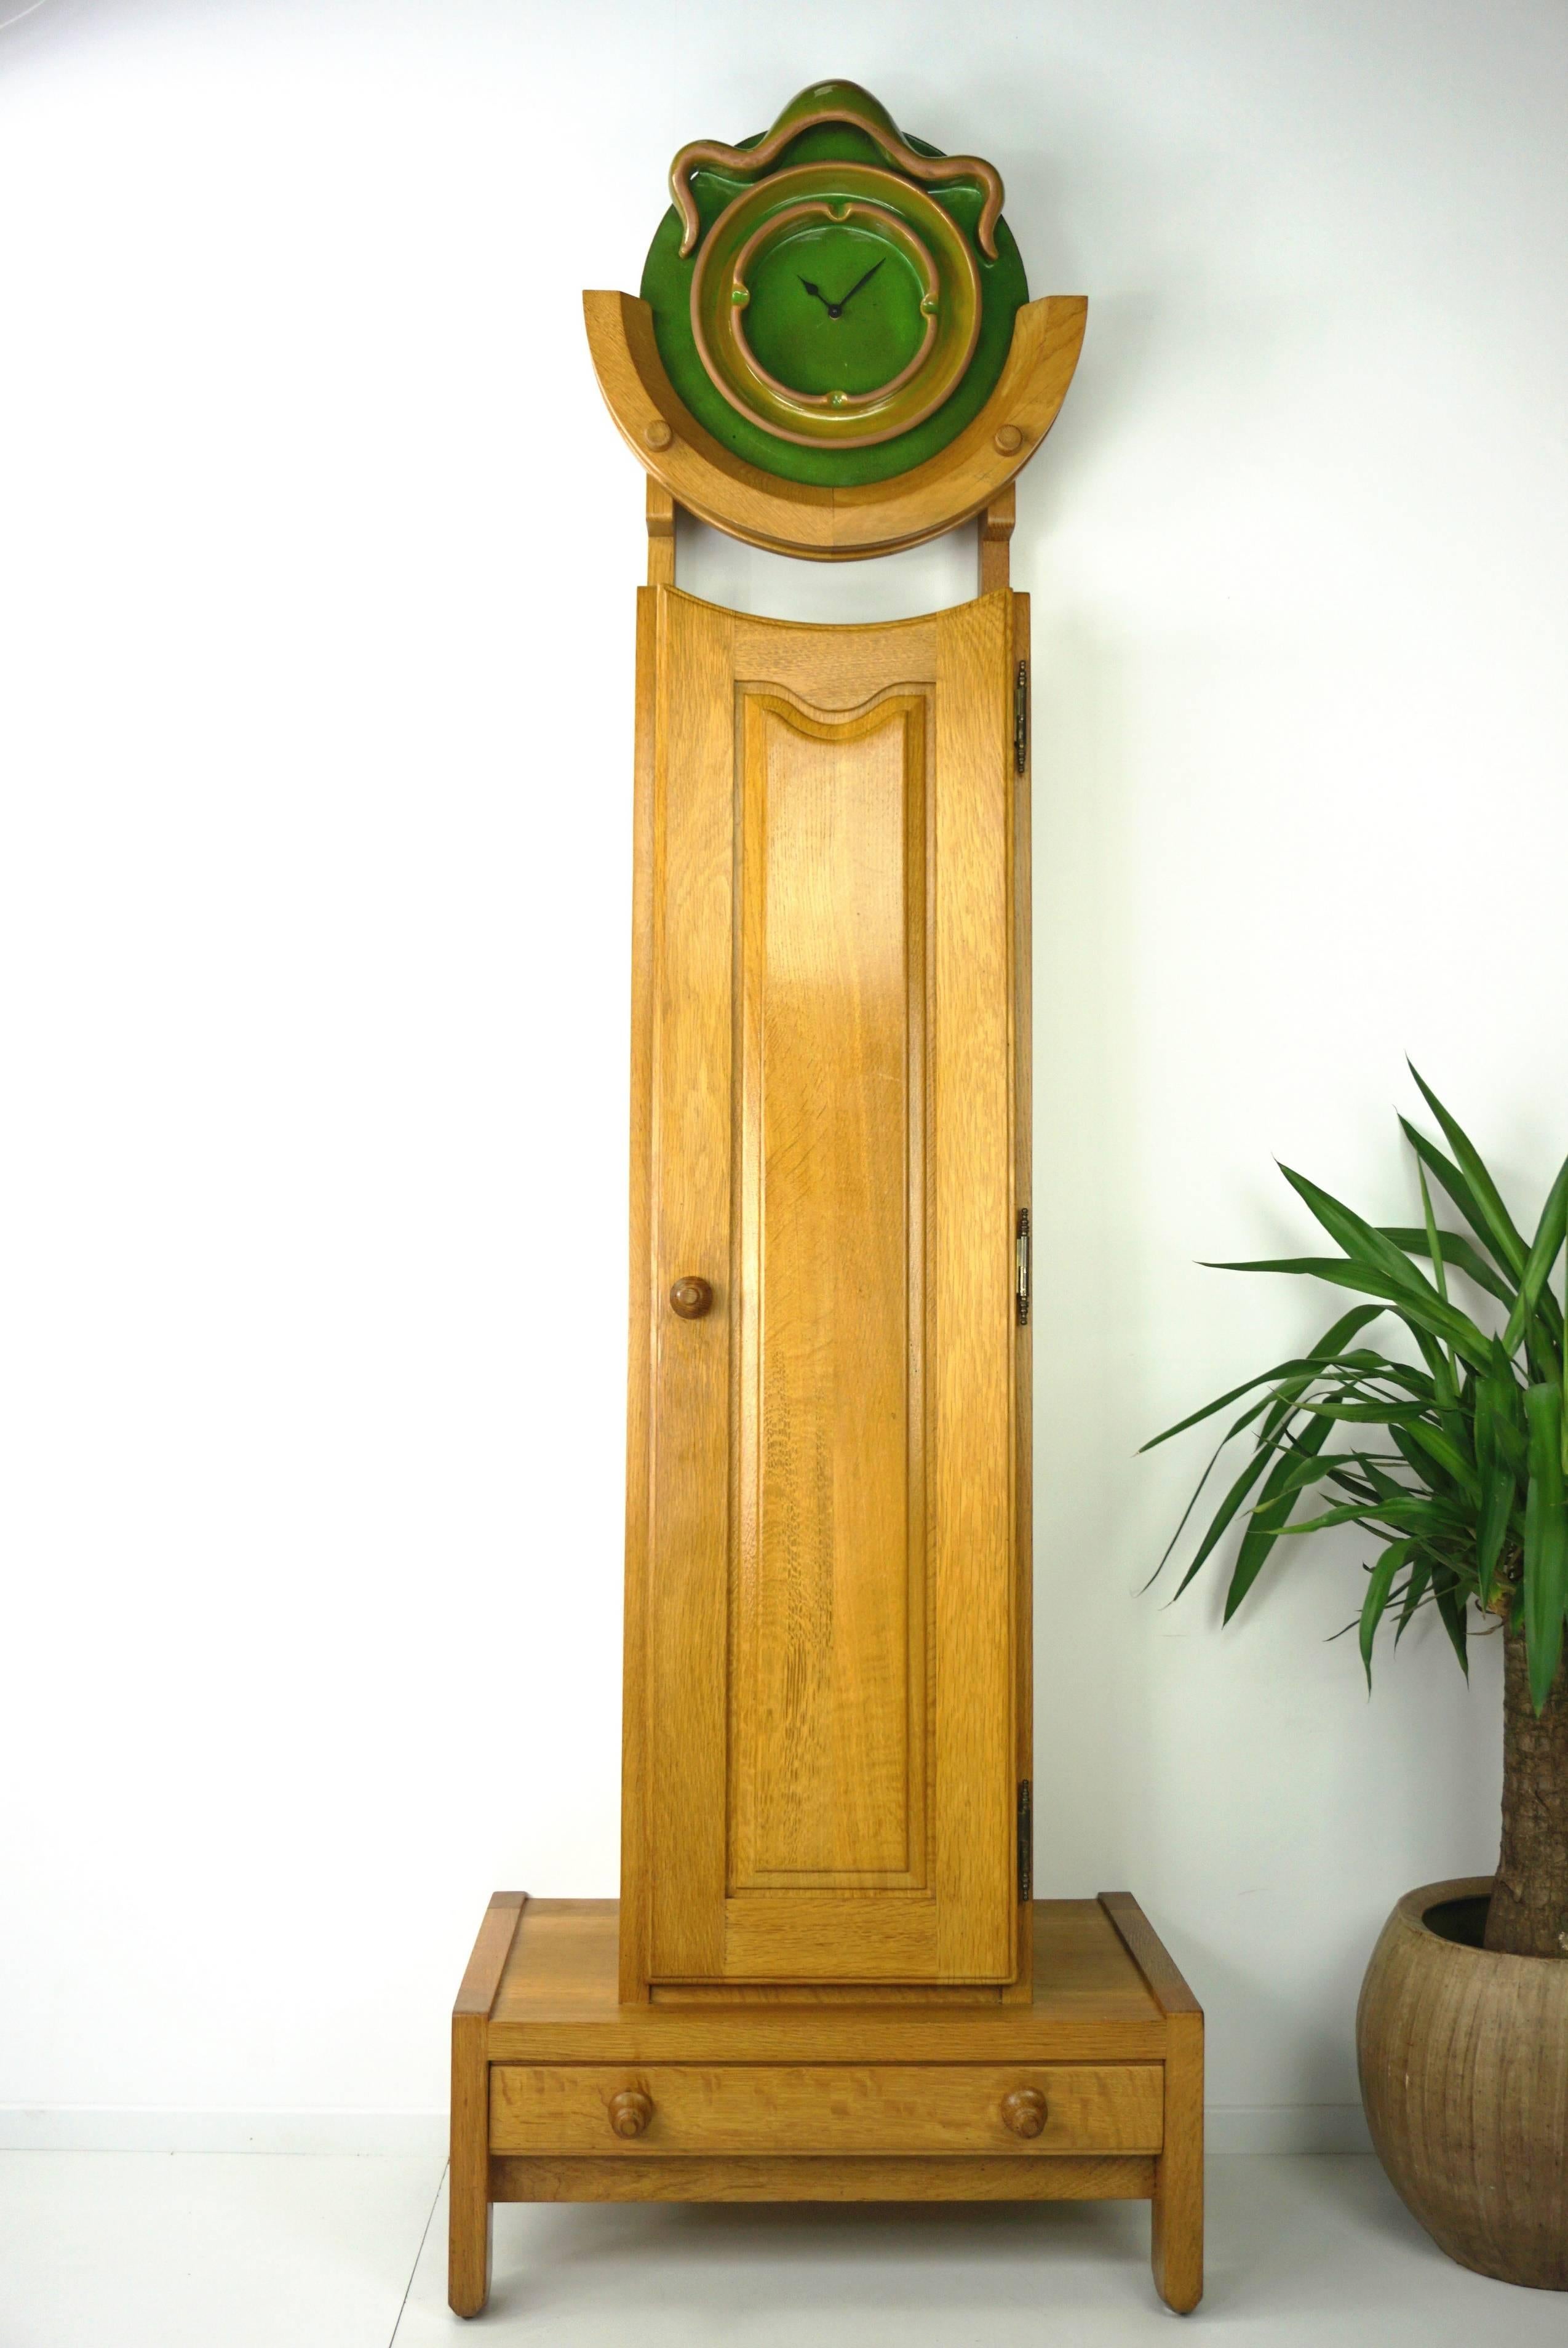 Mid-20th Century French Design Oak And Ceramic Longcase Clock By Guillerme And Chambron